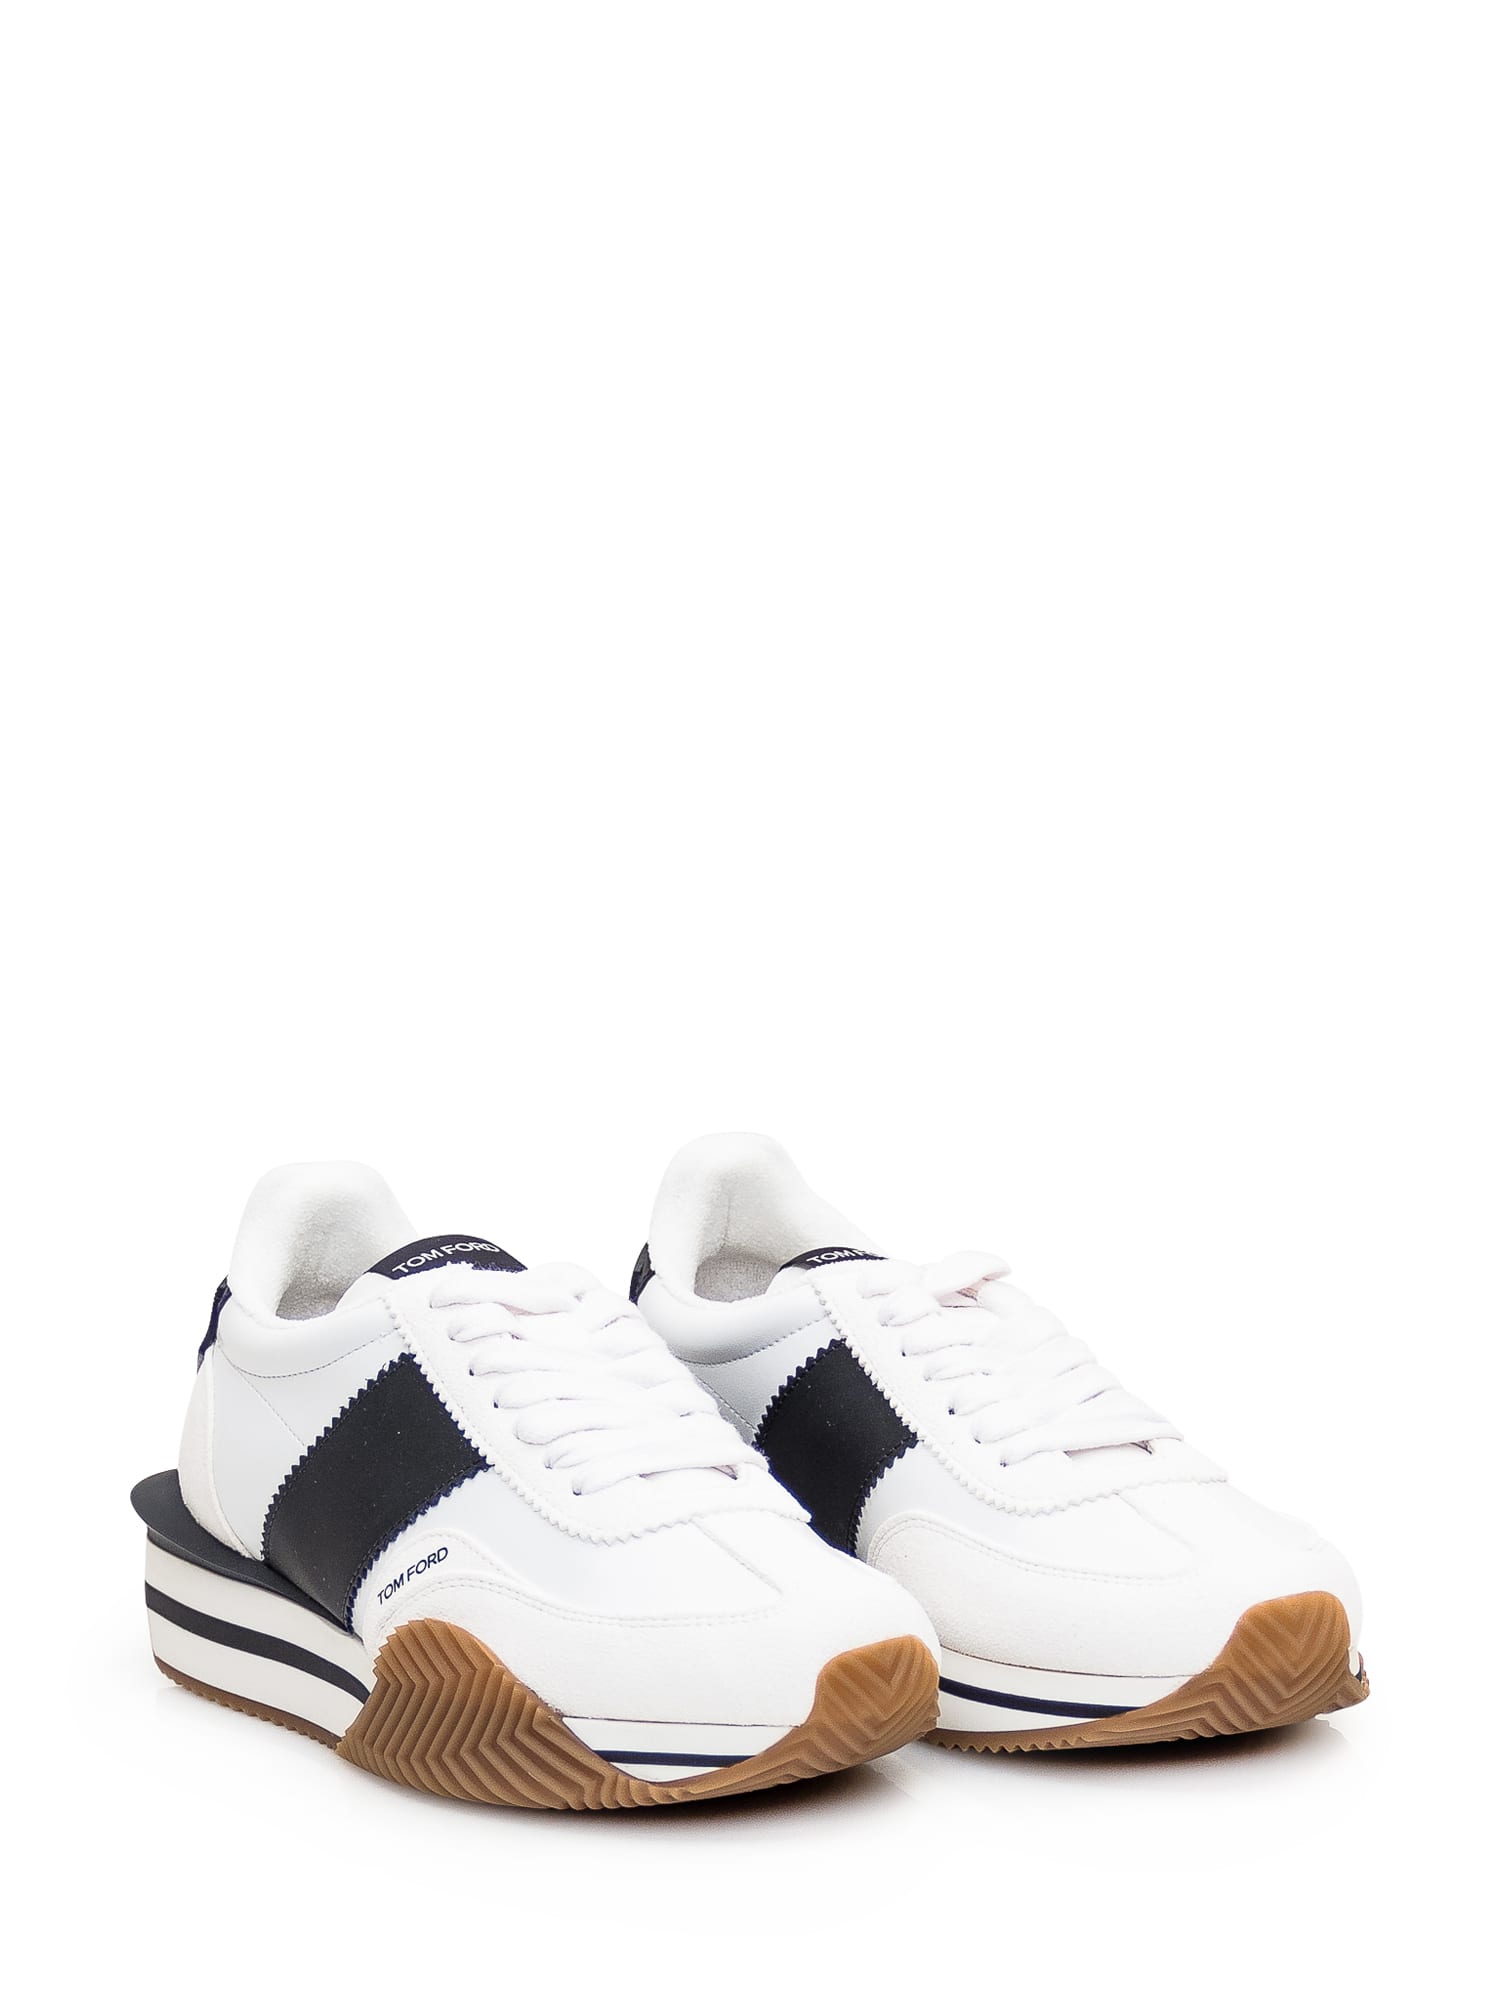 Shop Tom Ford Leather Sneaker In White/black Cream